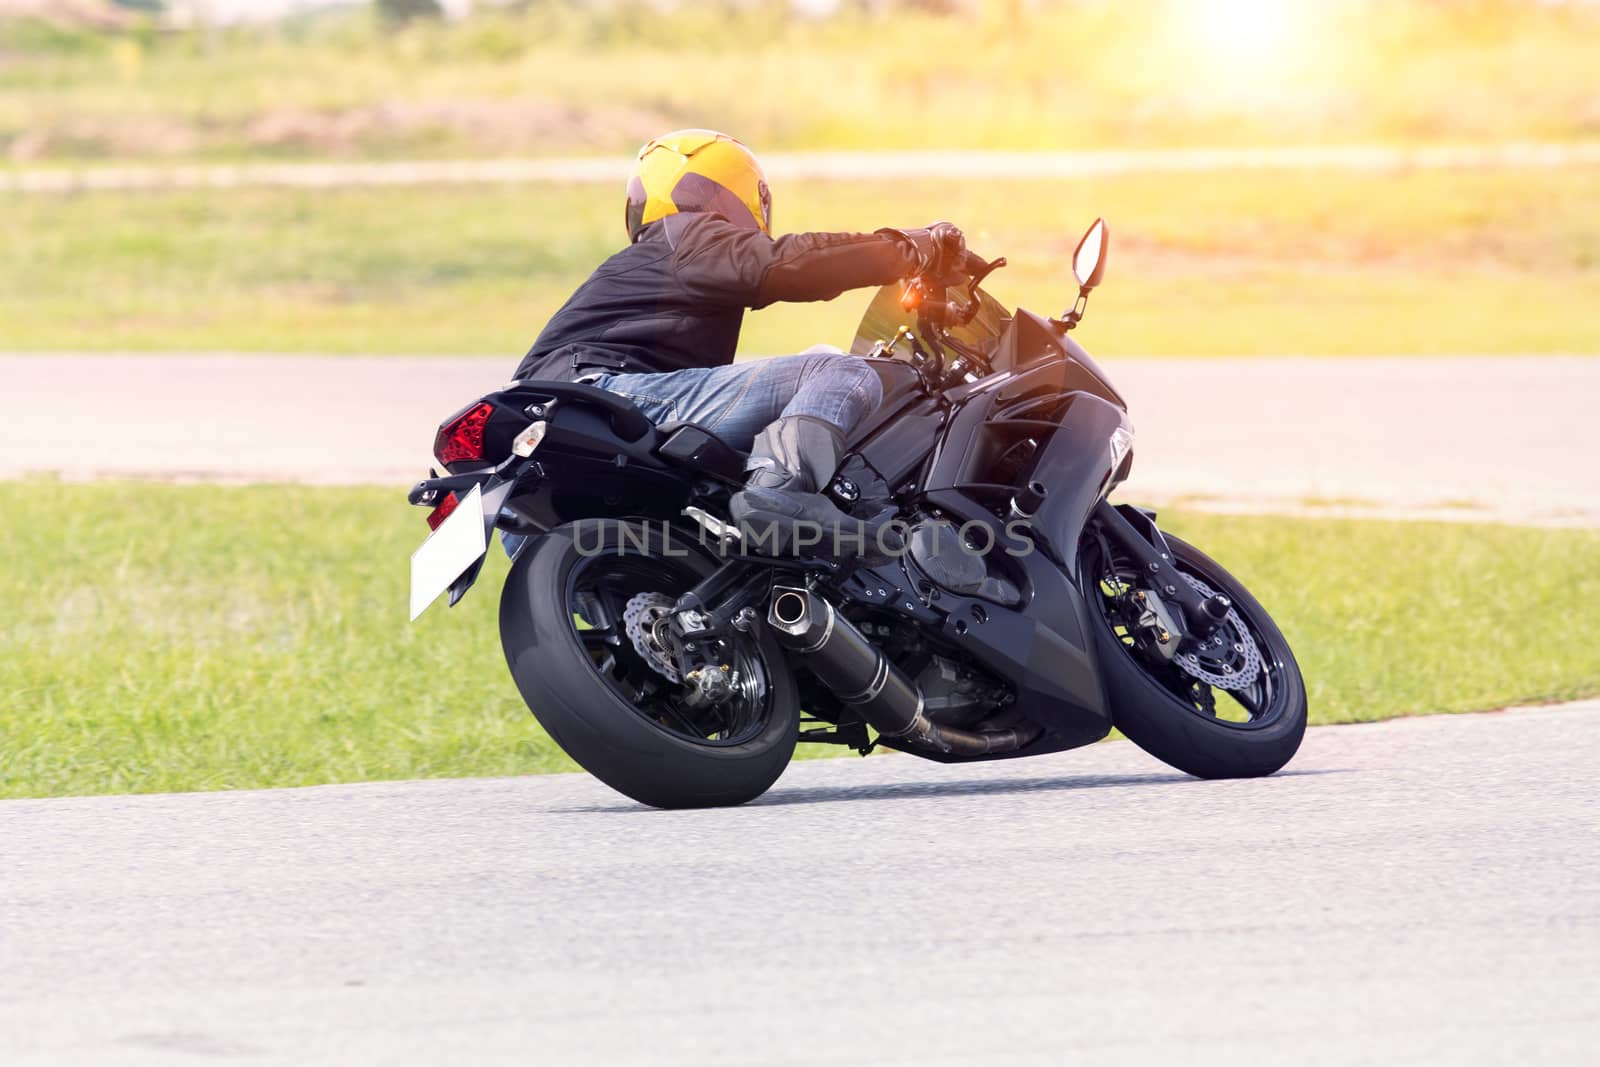 young man riding motorcycle in asphalt road curve wearing full safety suit 